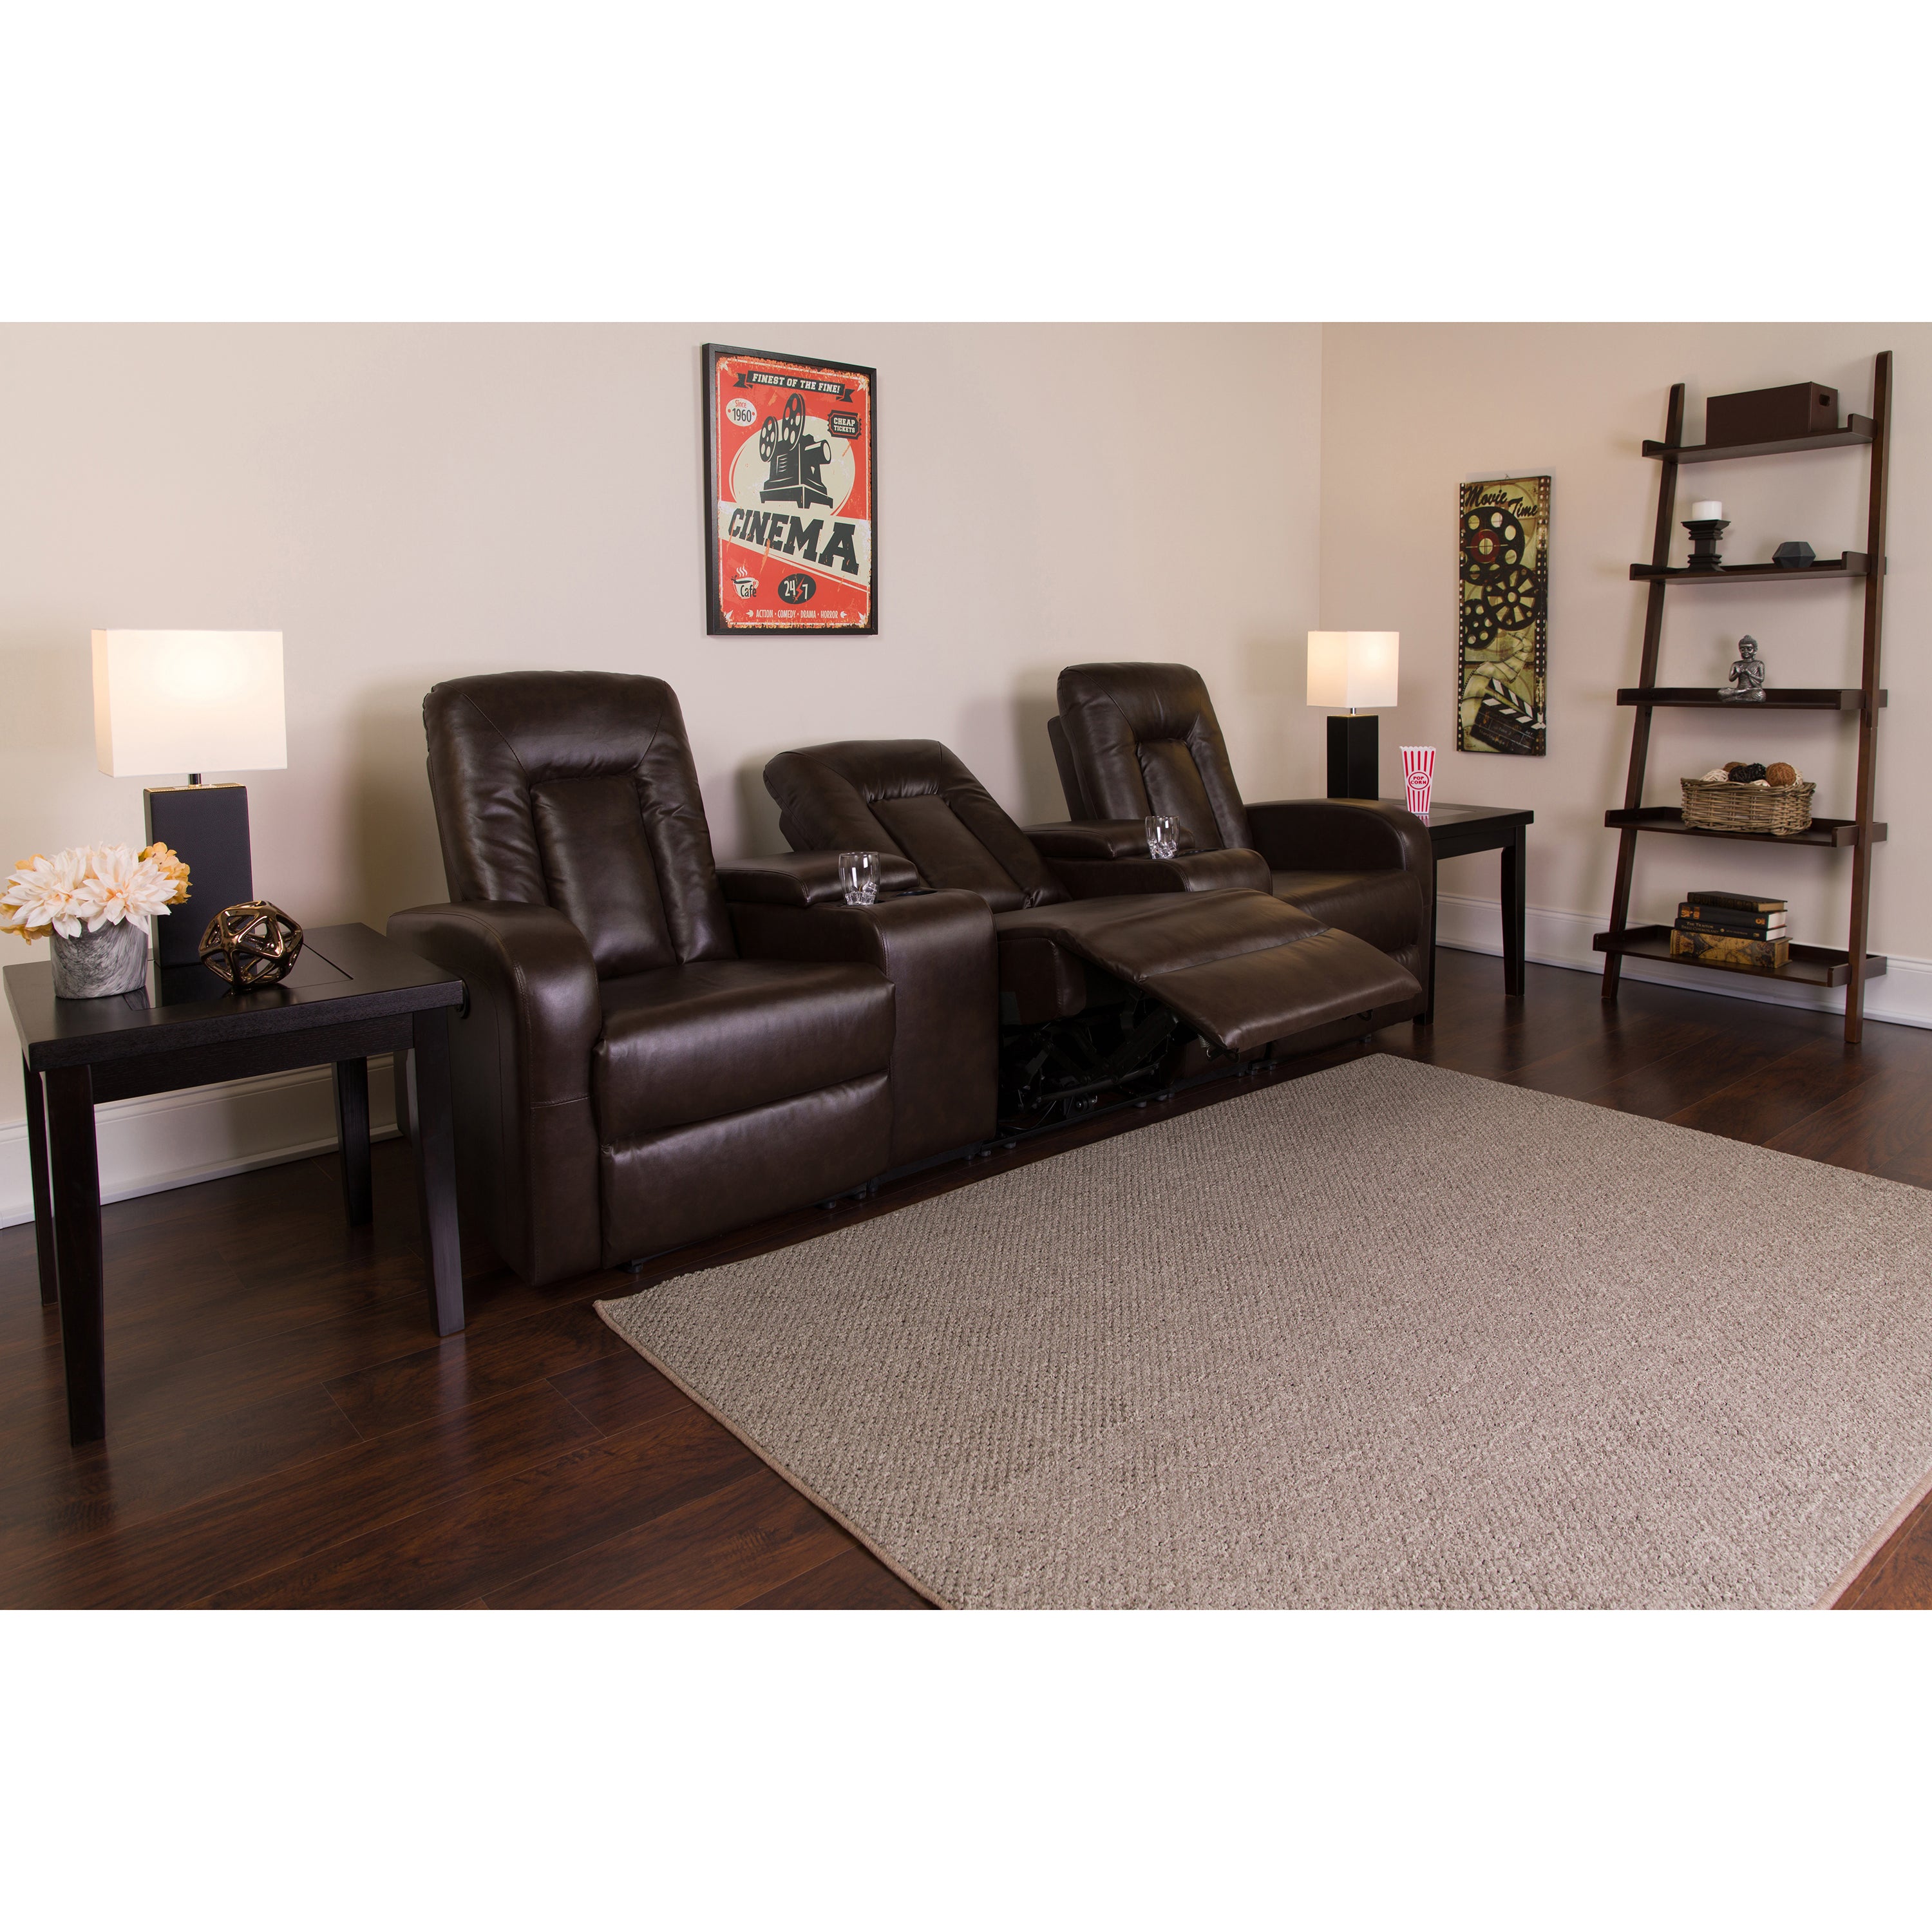 Eclipse Series 3-Seat Push Back Reclining Black LeatherSoft Theater Seating Unit with Cup Holders-Theater Seating-Flash Furniture-Wall2Wall Furnishings